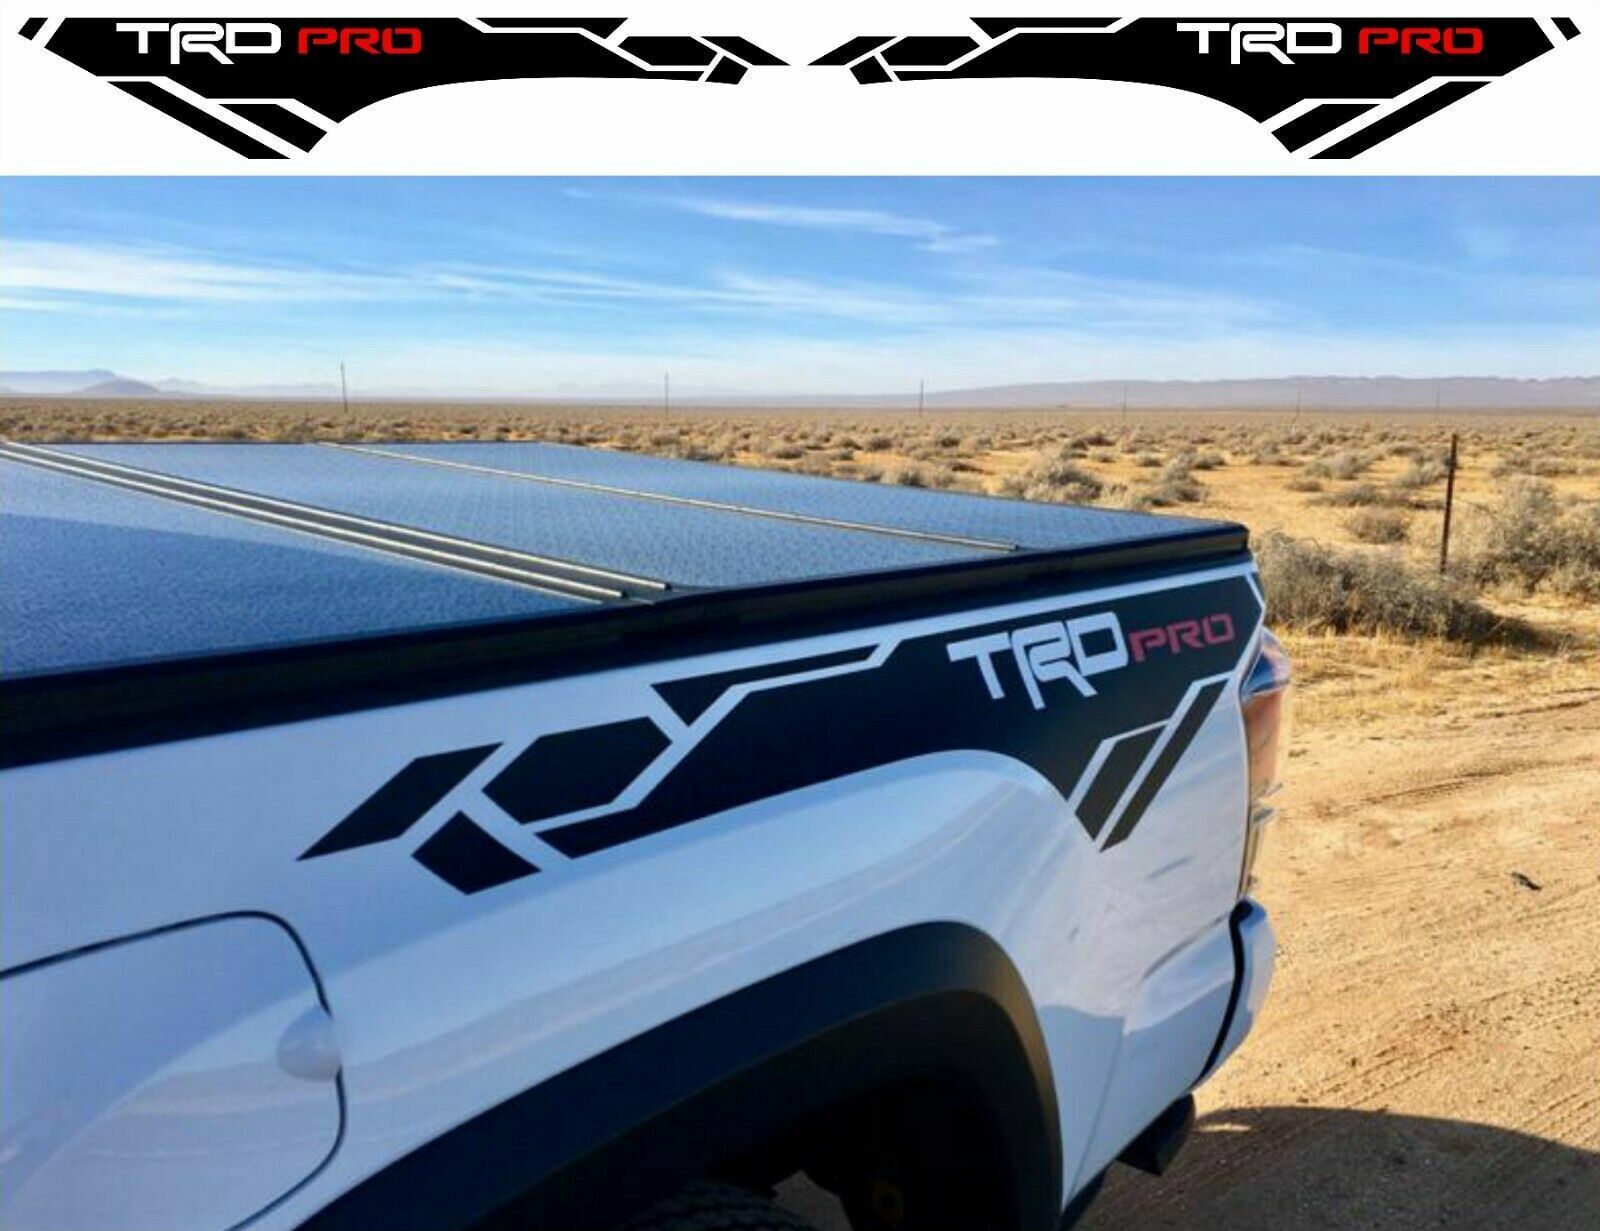 2X Toyota Tacoma TRD PRO 2016-2020 side Vinyl Decals stickers 